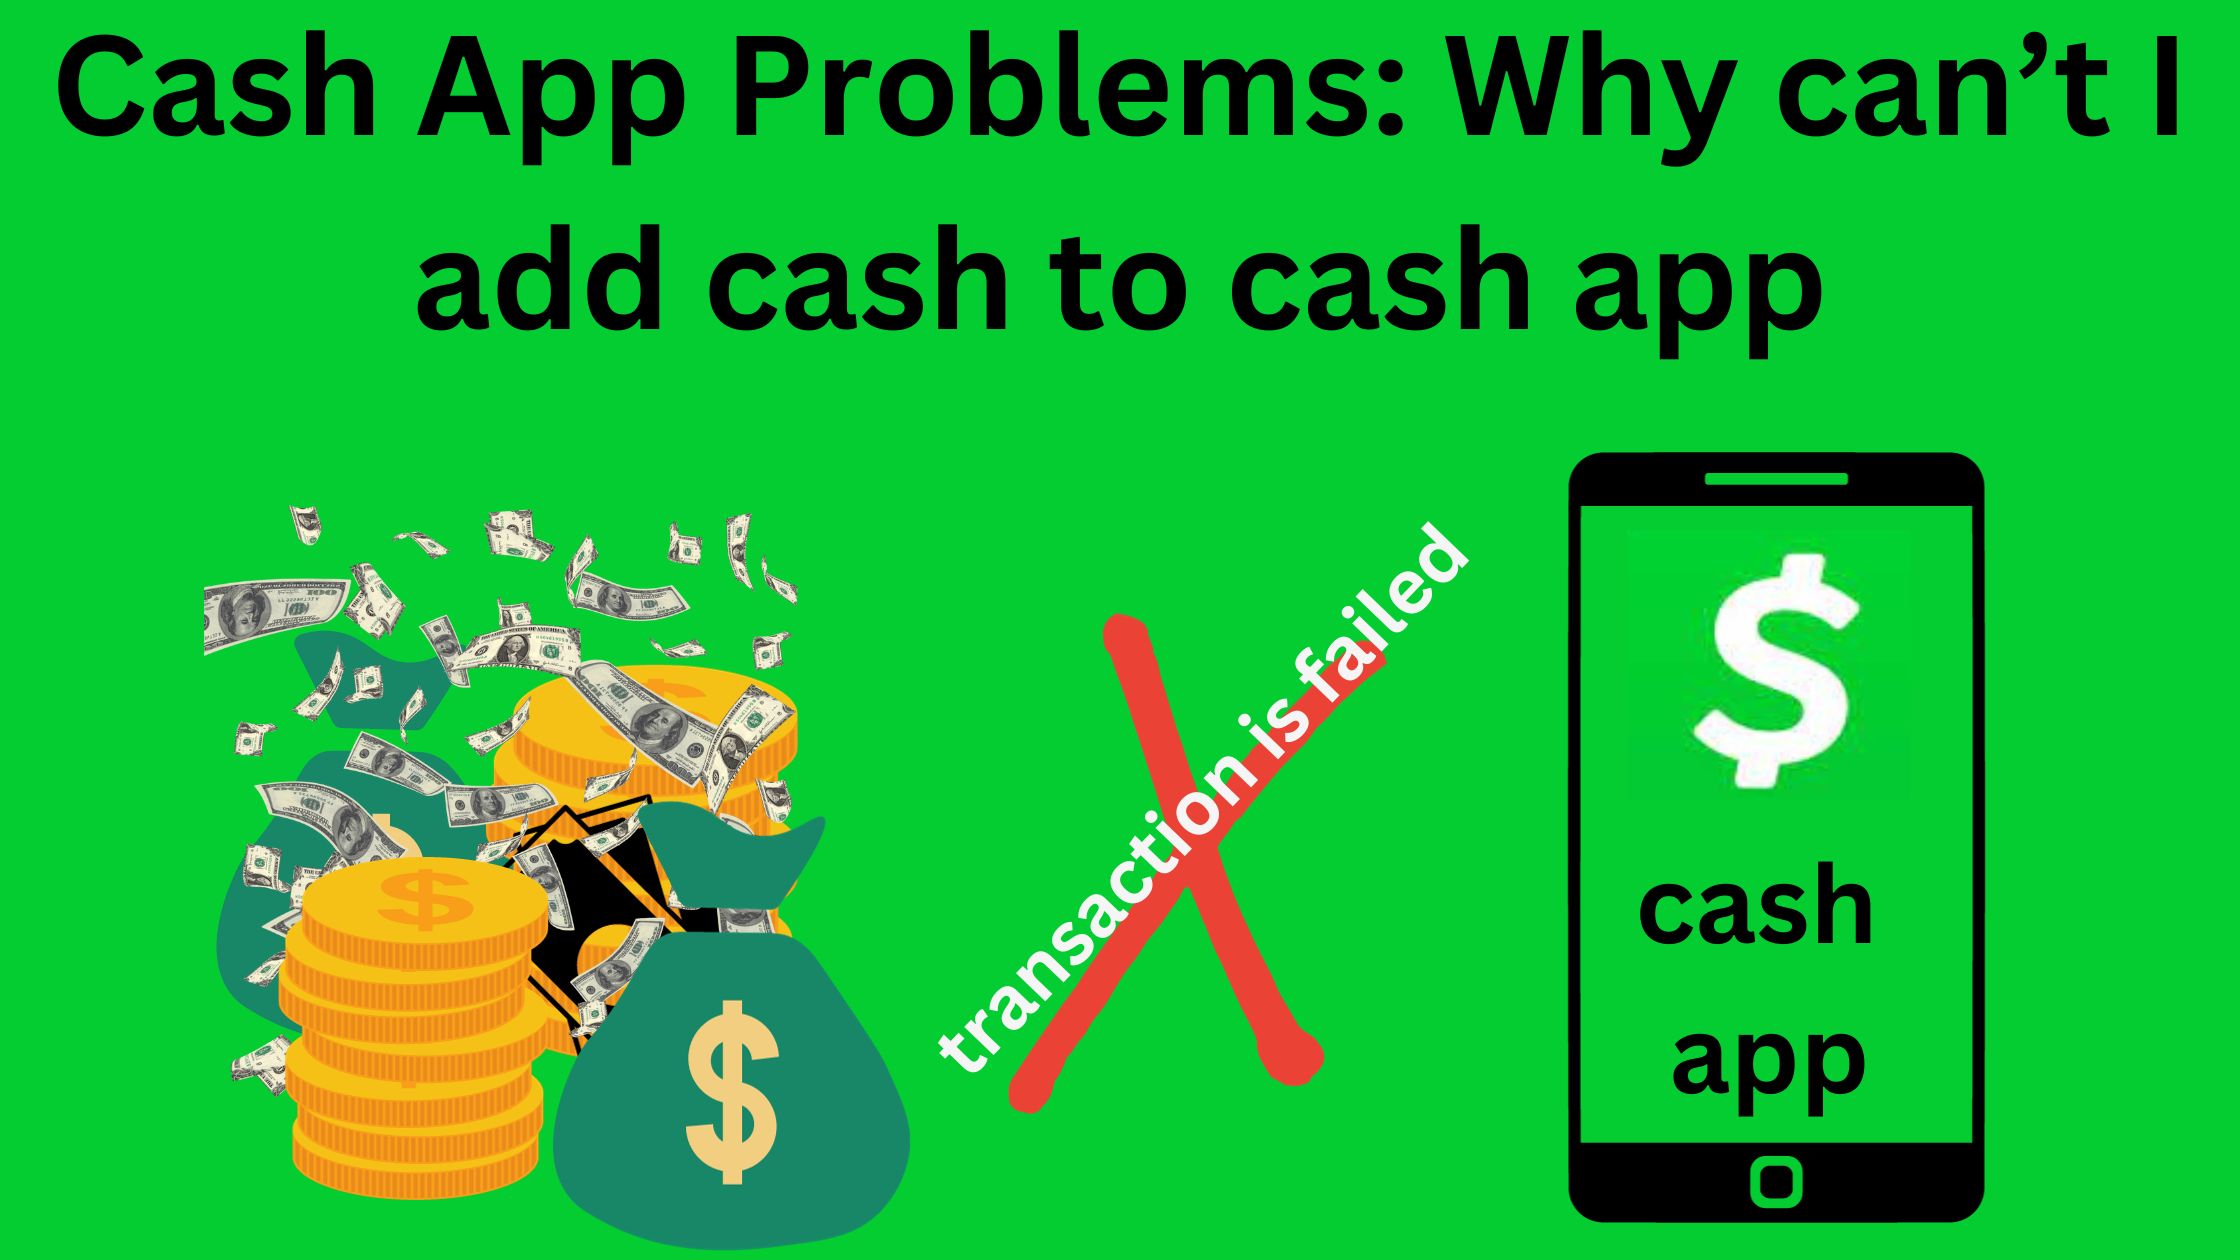 Why can't I add cash to Cash App